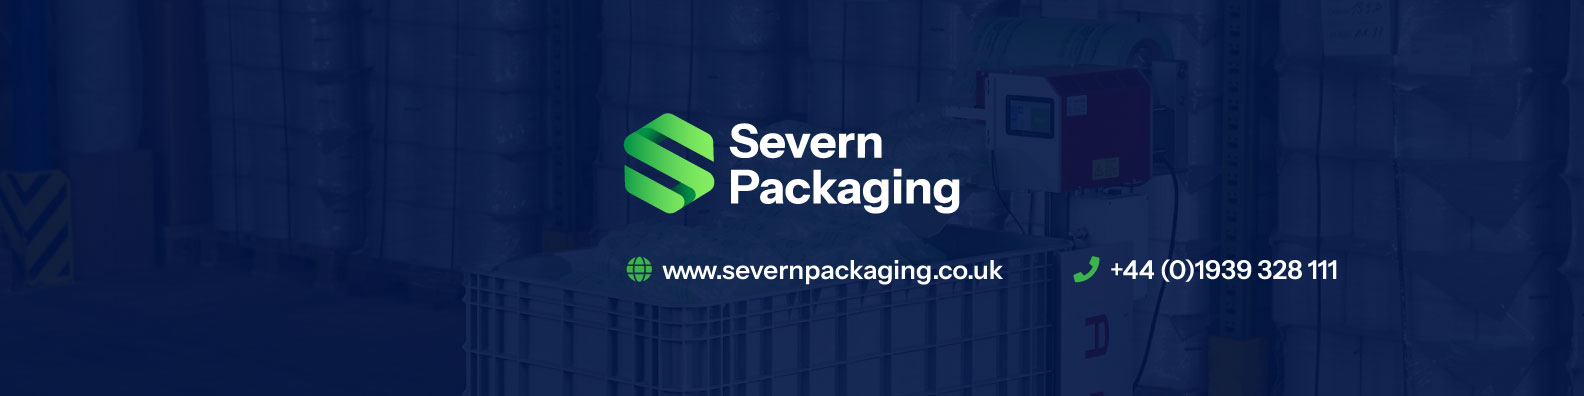 Main image for Severn Packaging